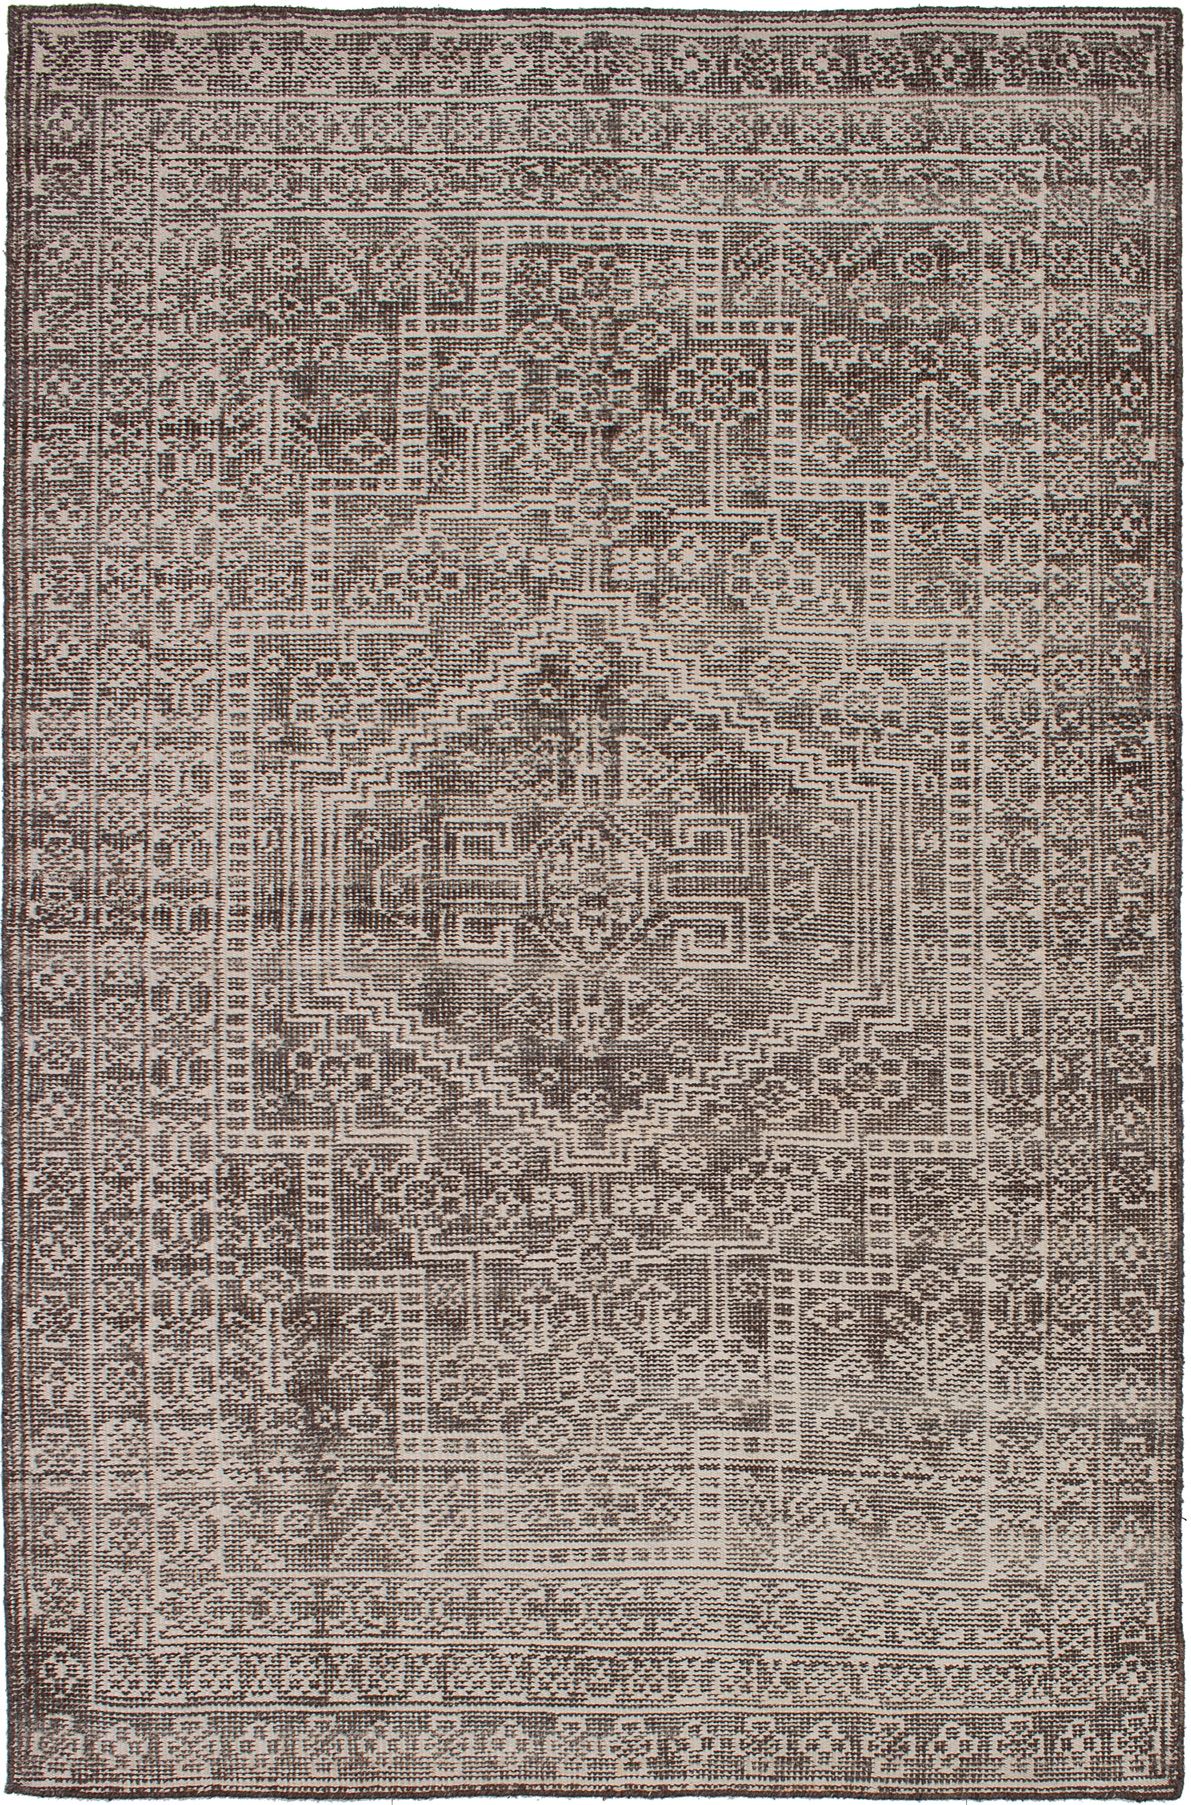 Hand-knotted Eternity Brown Cotton Rug 5'3" x 8'2" Size: 5'3" x 8'2"  